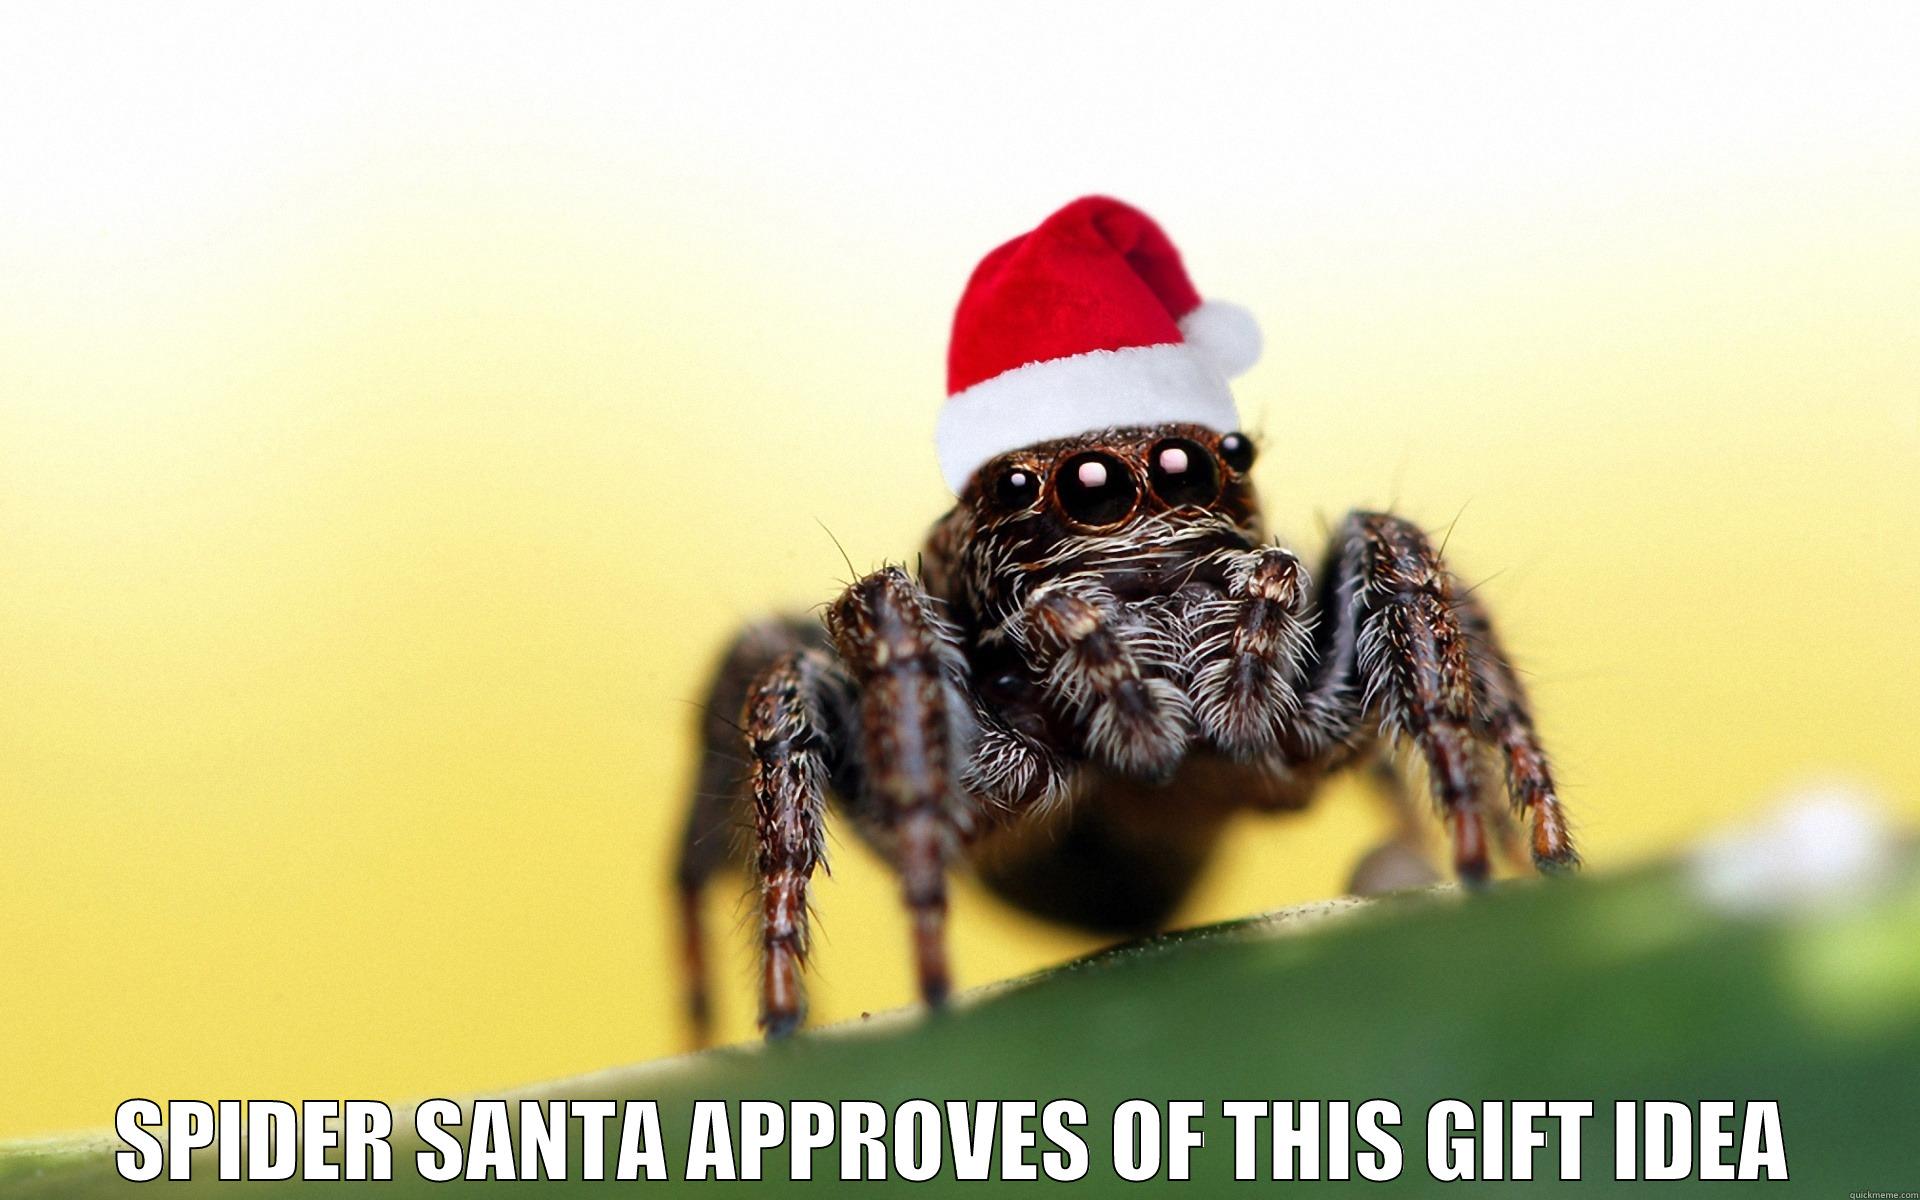 spider slippers for every girl -  SPIDER SANTA APPROVES OF THIS GIFT IDEA Misc